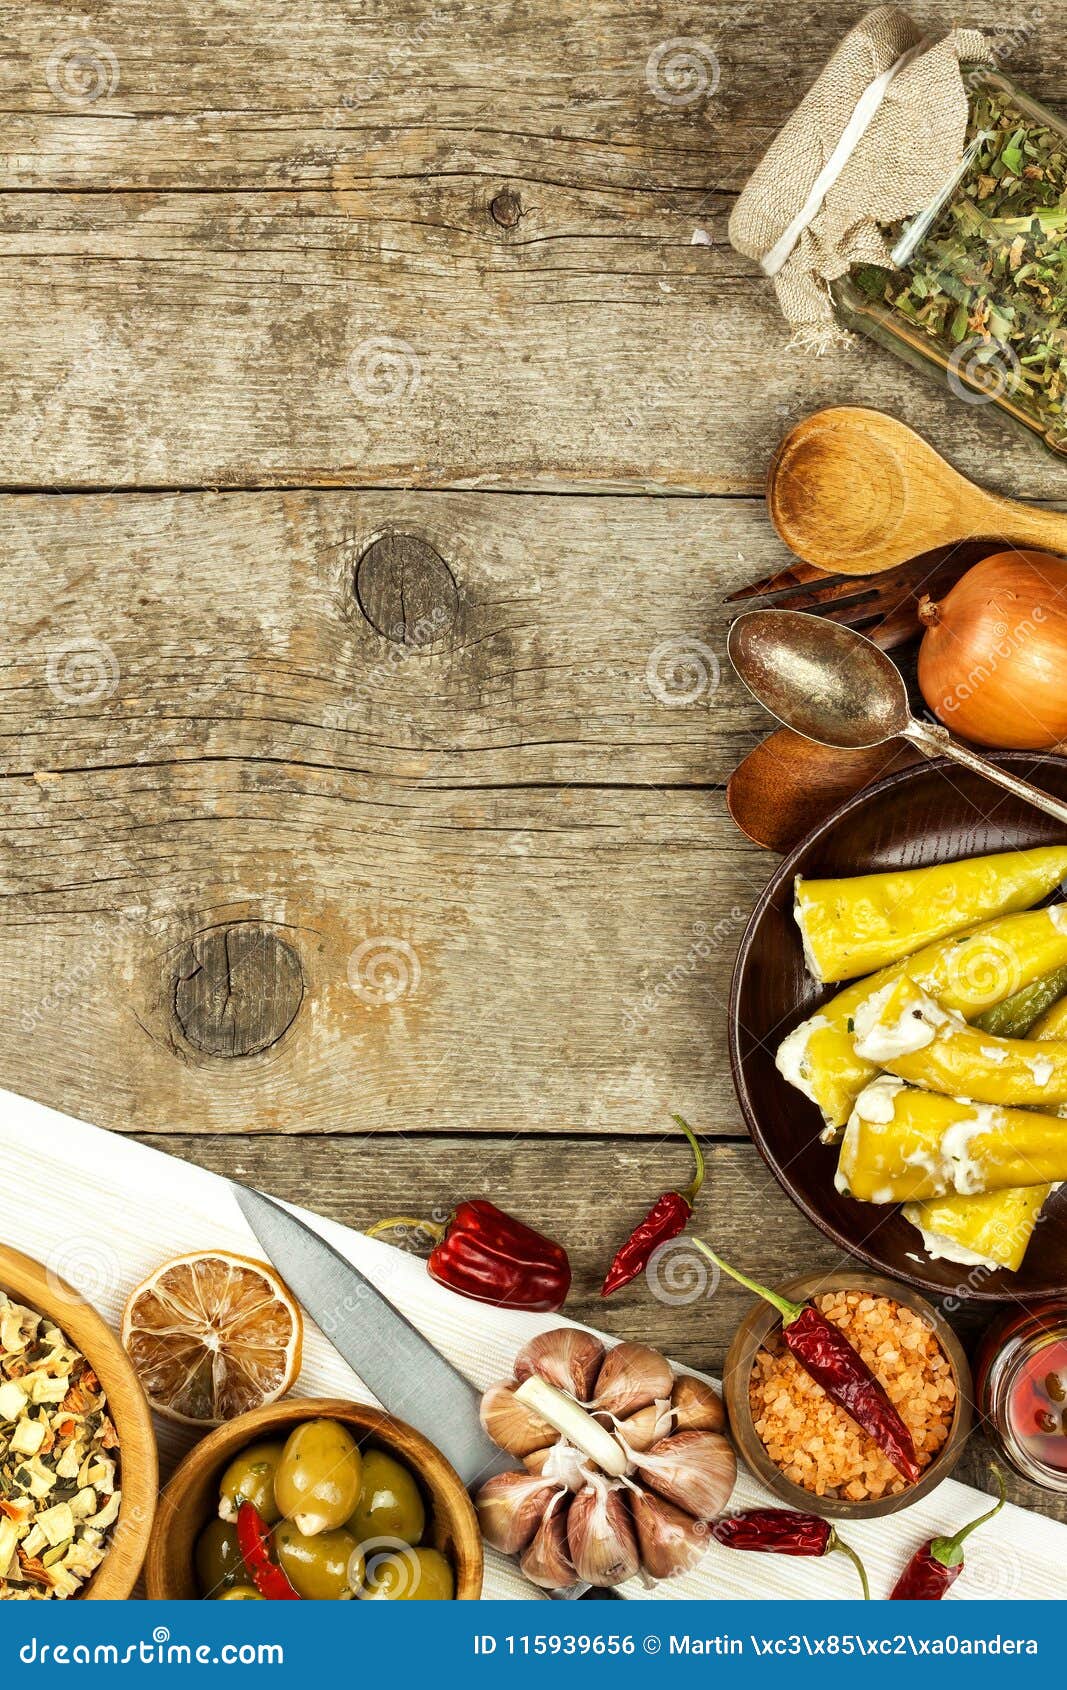 Food Ingredients on a Wooden Background. Place for Text. Restaurant ...